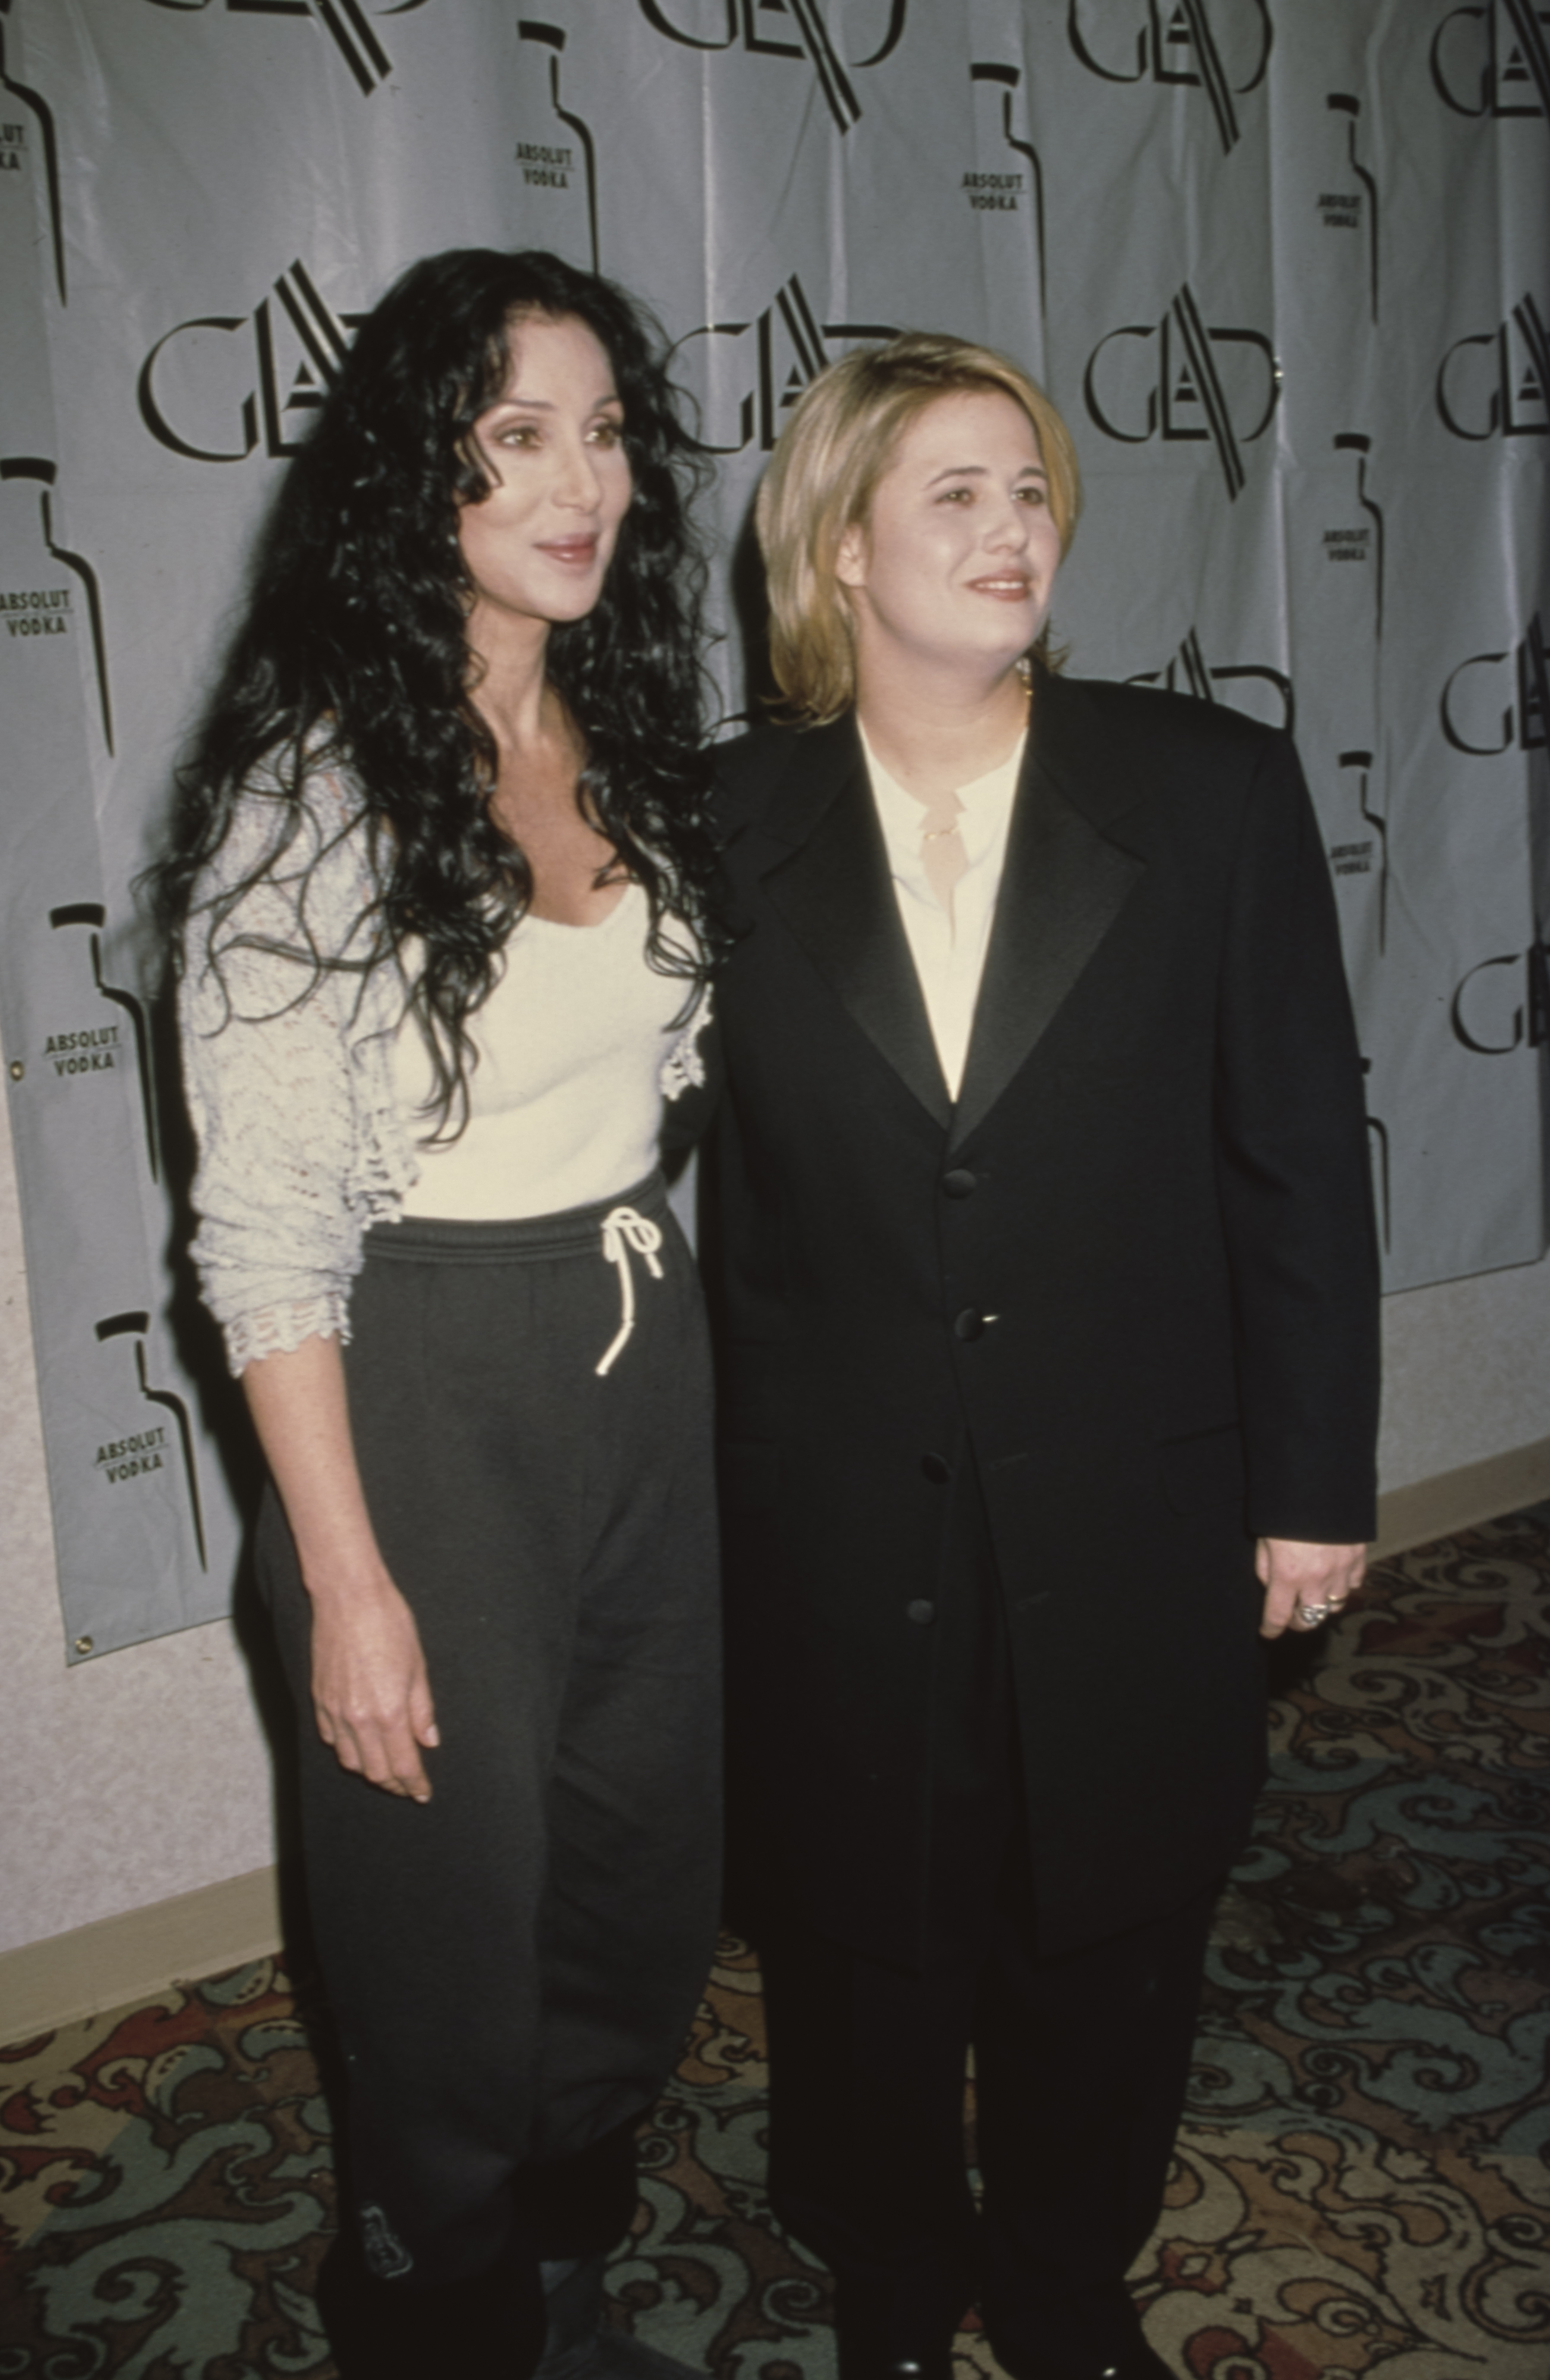 Cher and Chastity Bono at the 19th Annual Glaad Media Awards in Los Angeles, California on April 19, 1998. | Source: Getty Images